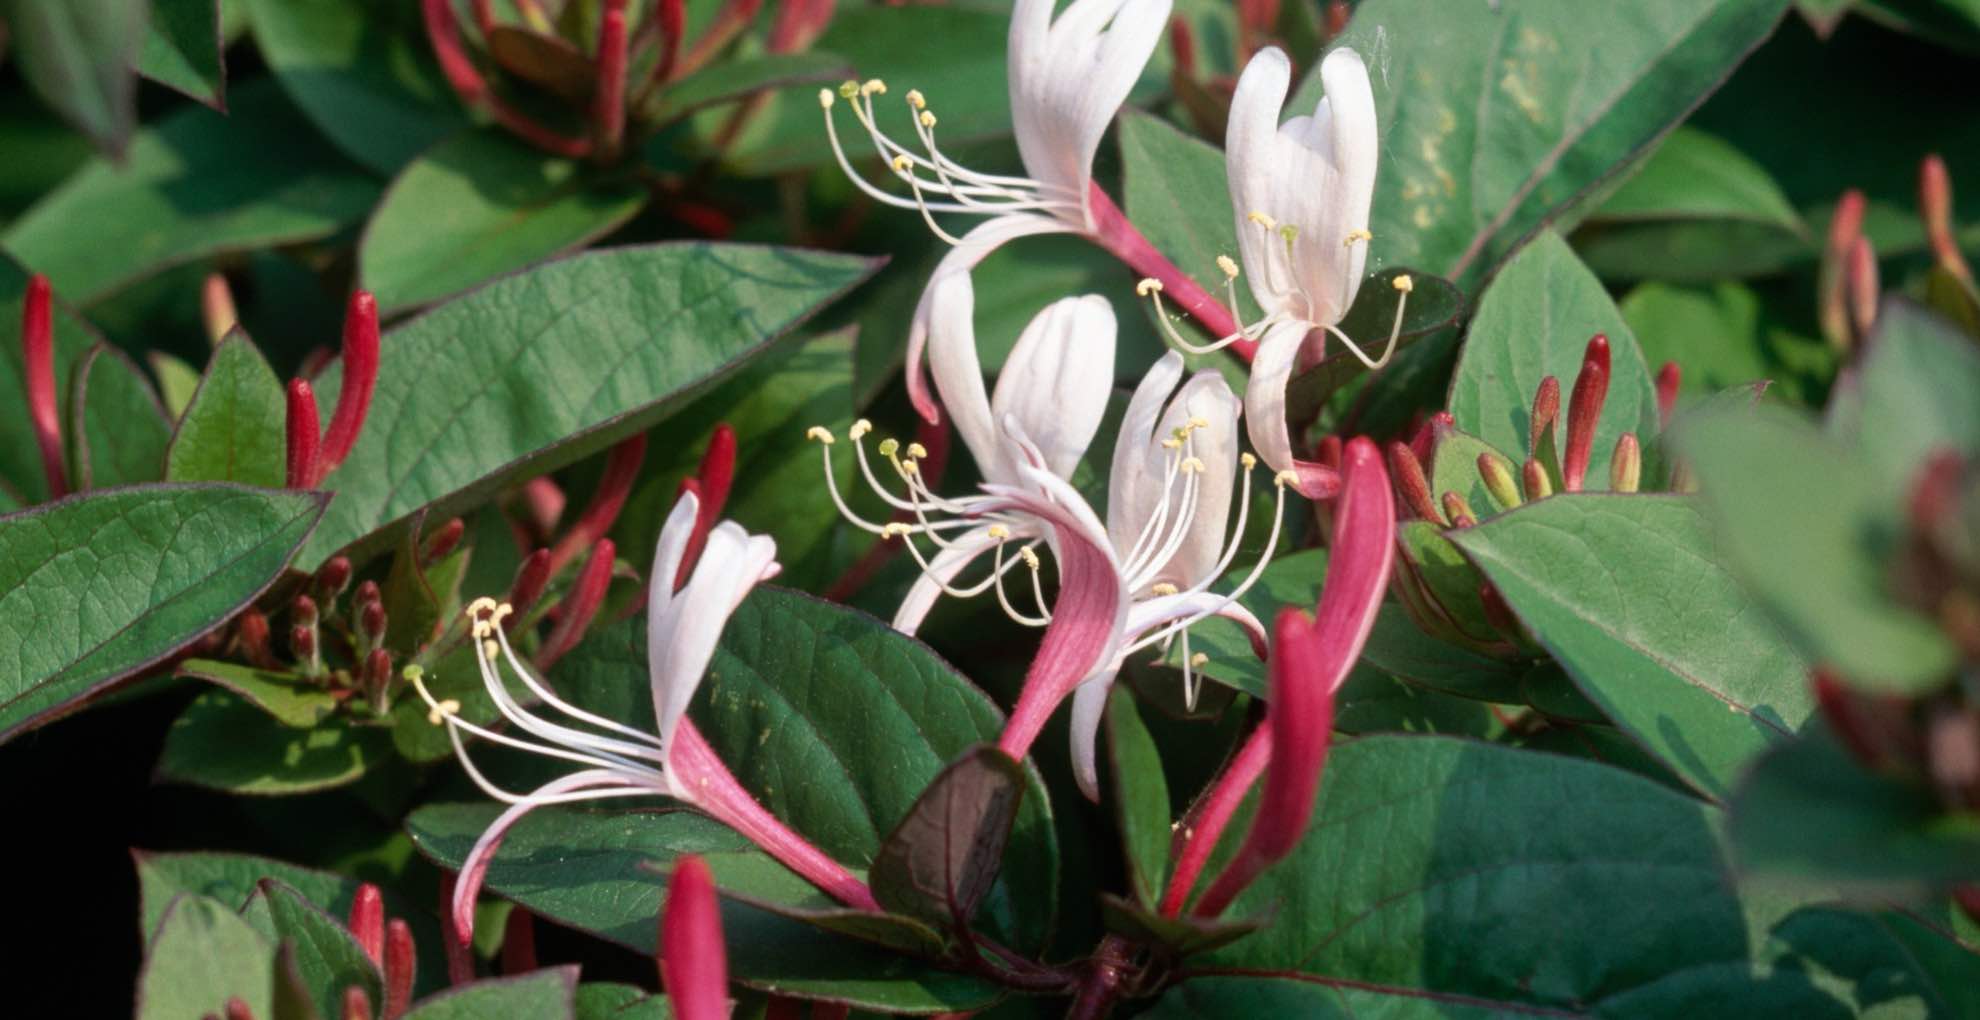 Originally introduced as ornamental plants in the early 20th century, Asian honeysuckle rapidly spread across the Eastern Seaboard of the United States.